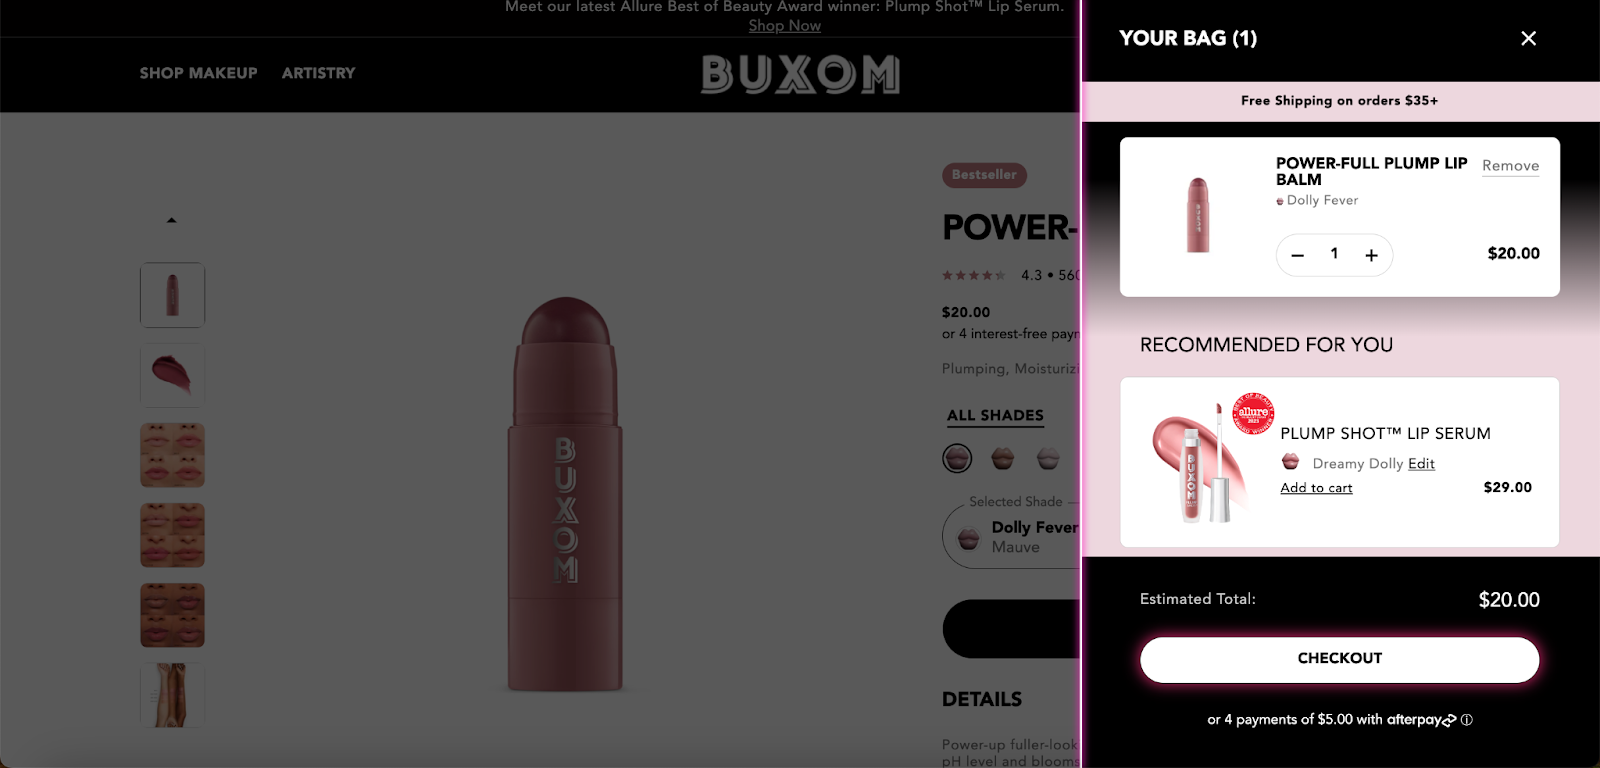 Buxom's cart page showing recommended items to add.